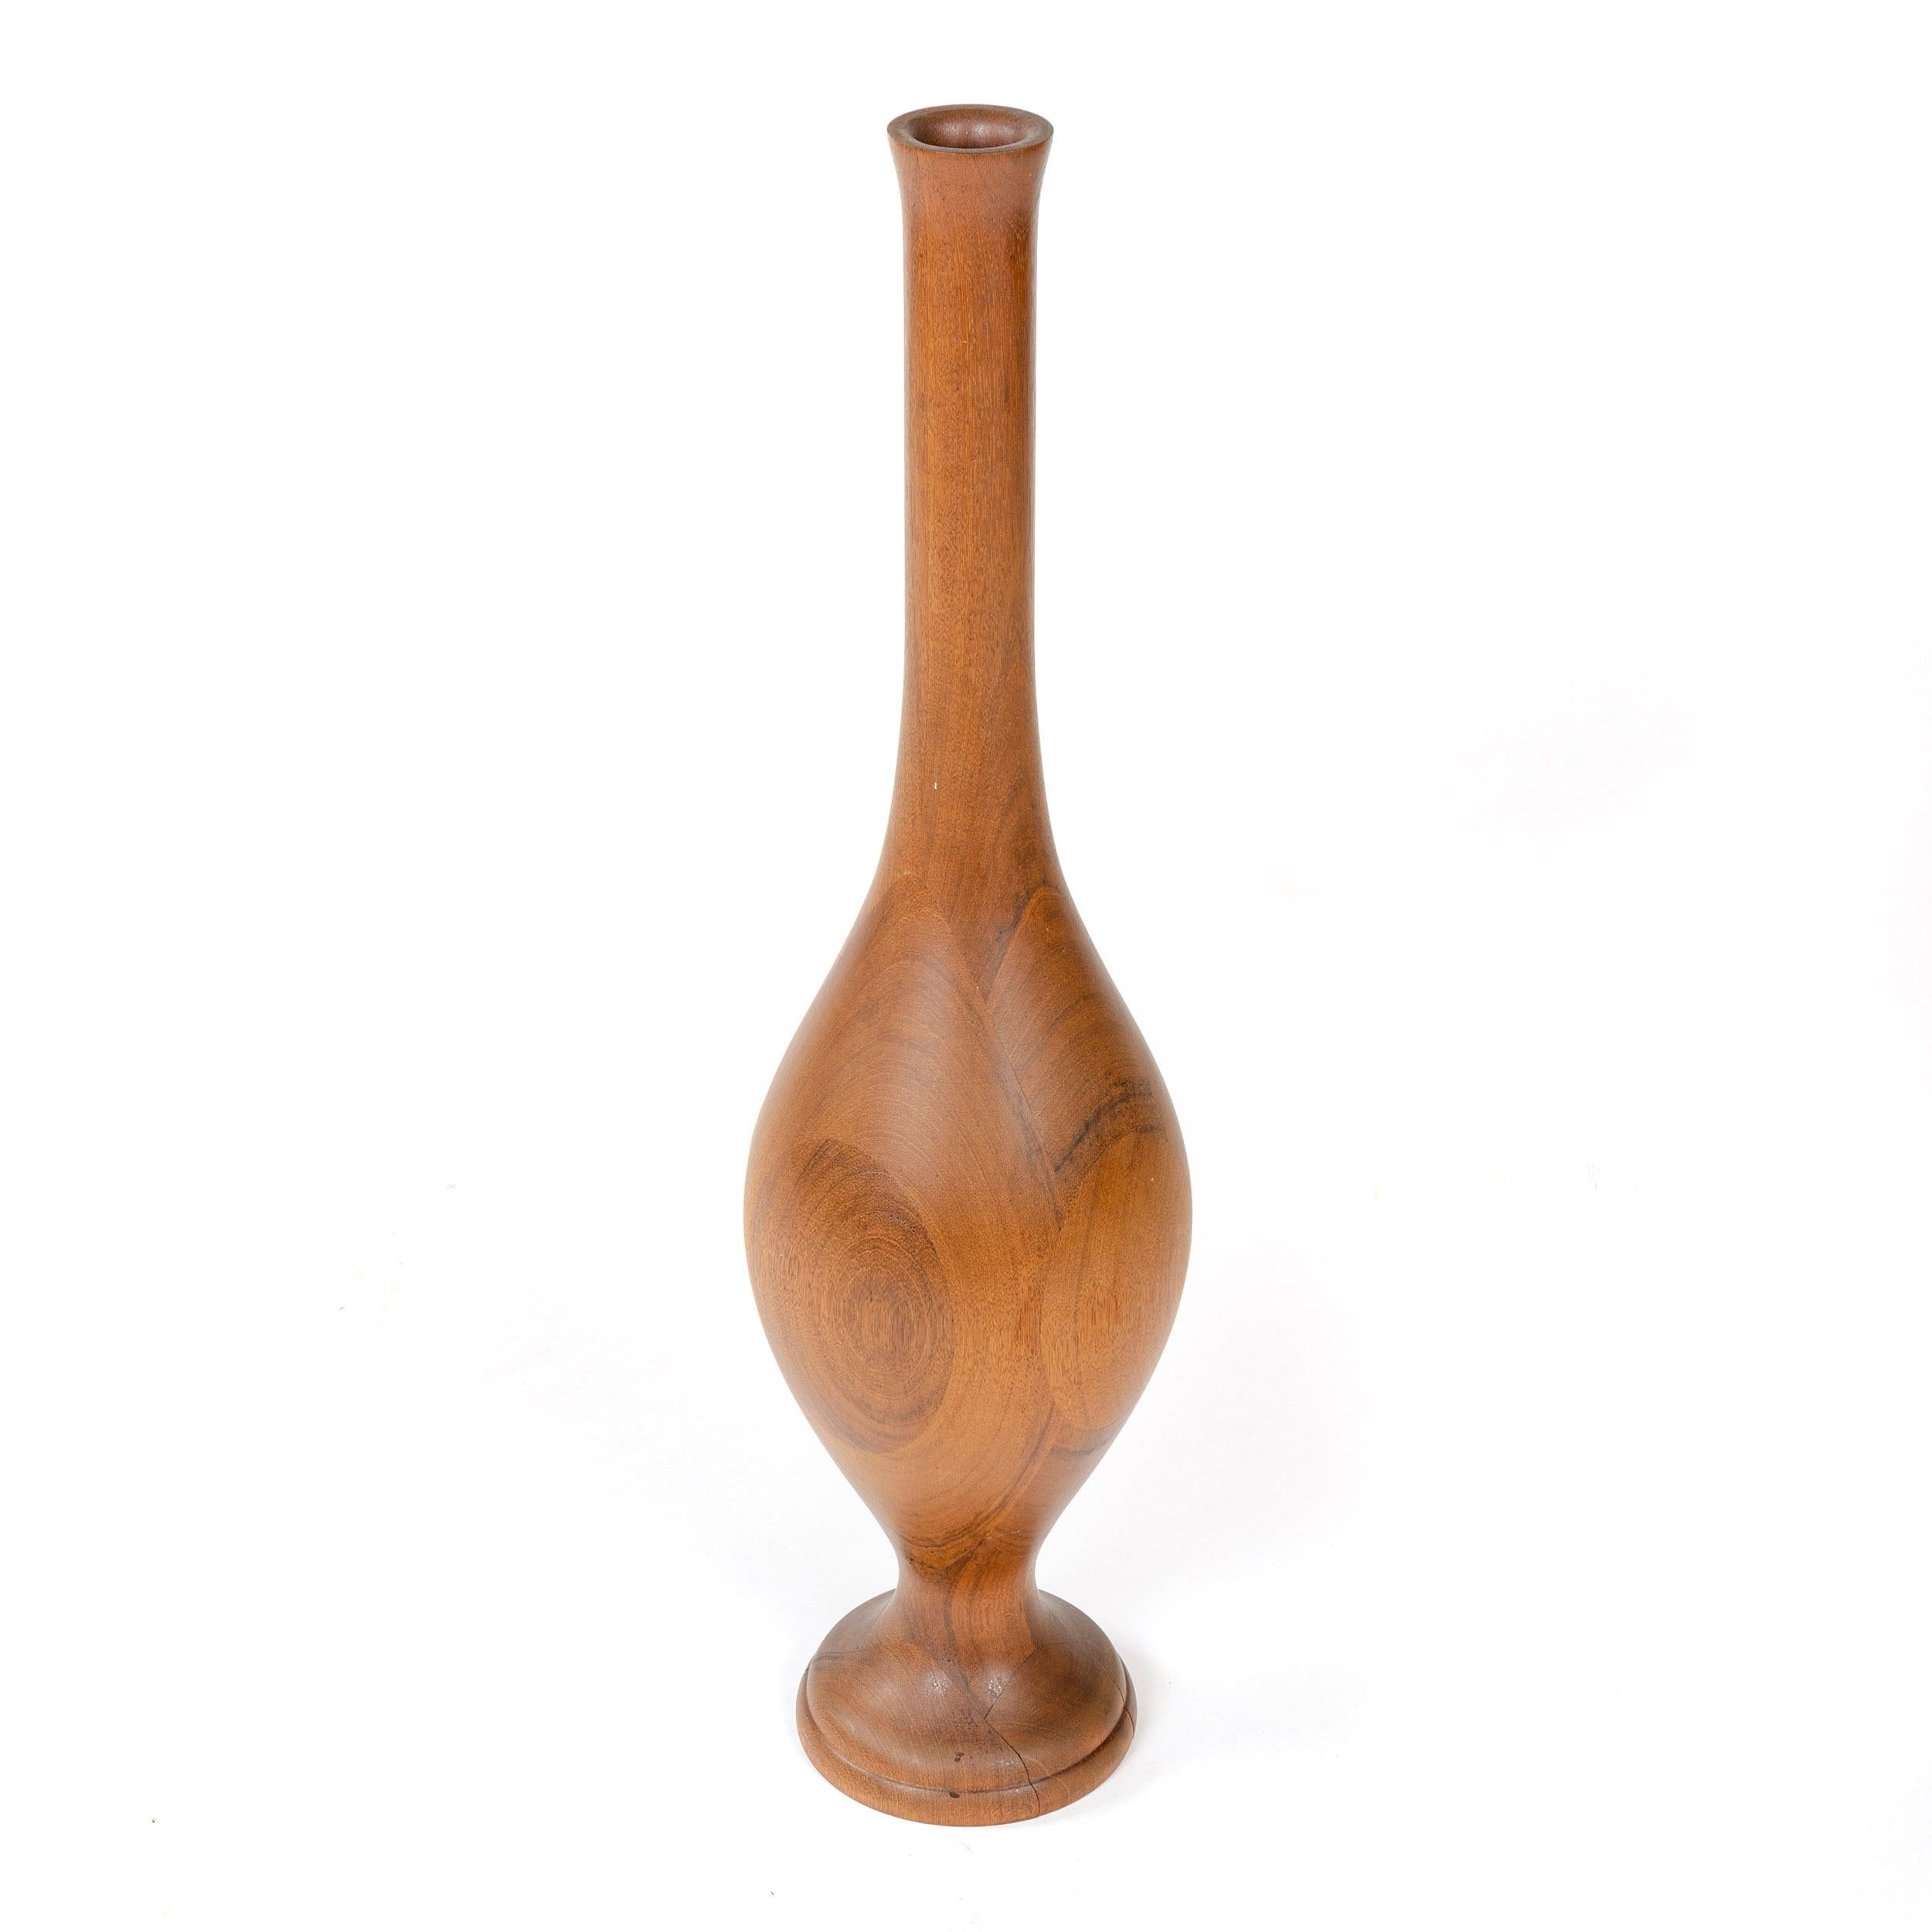 A substantial floor vase constructed of laminated solid wood. Signed 'M B' on the underside as depicted.